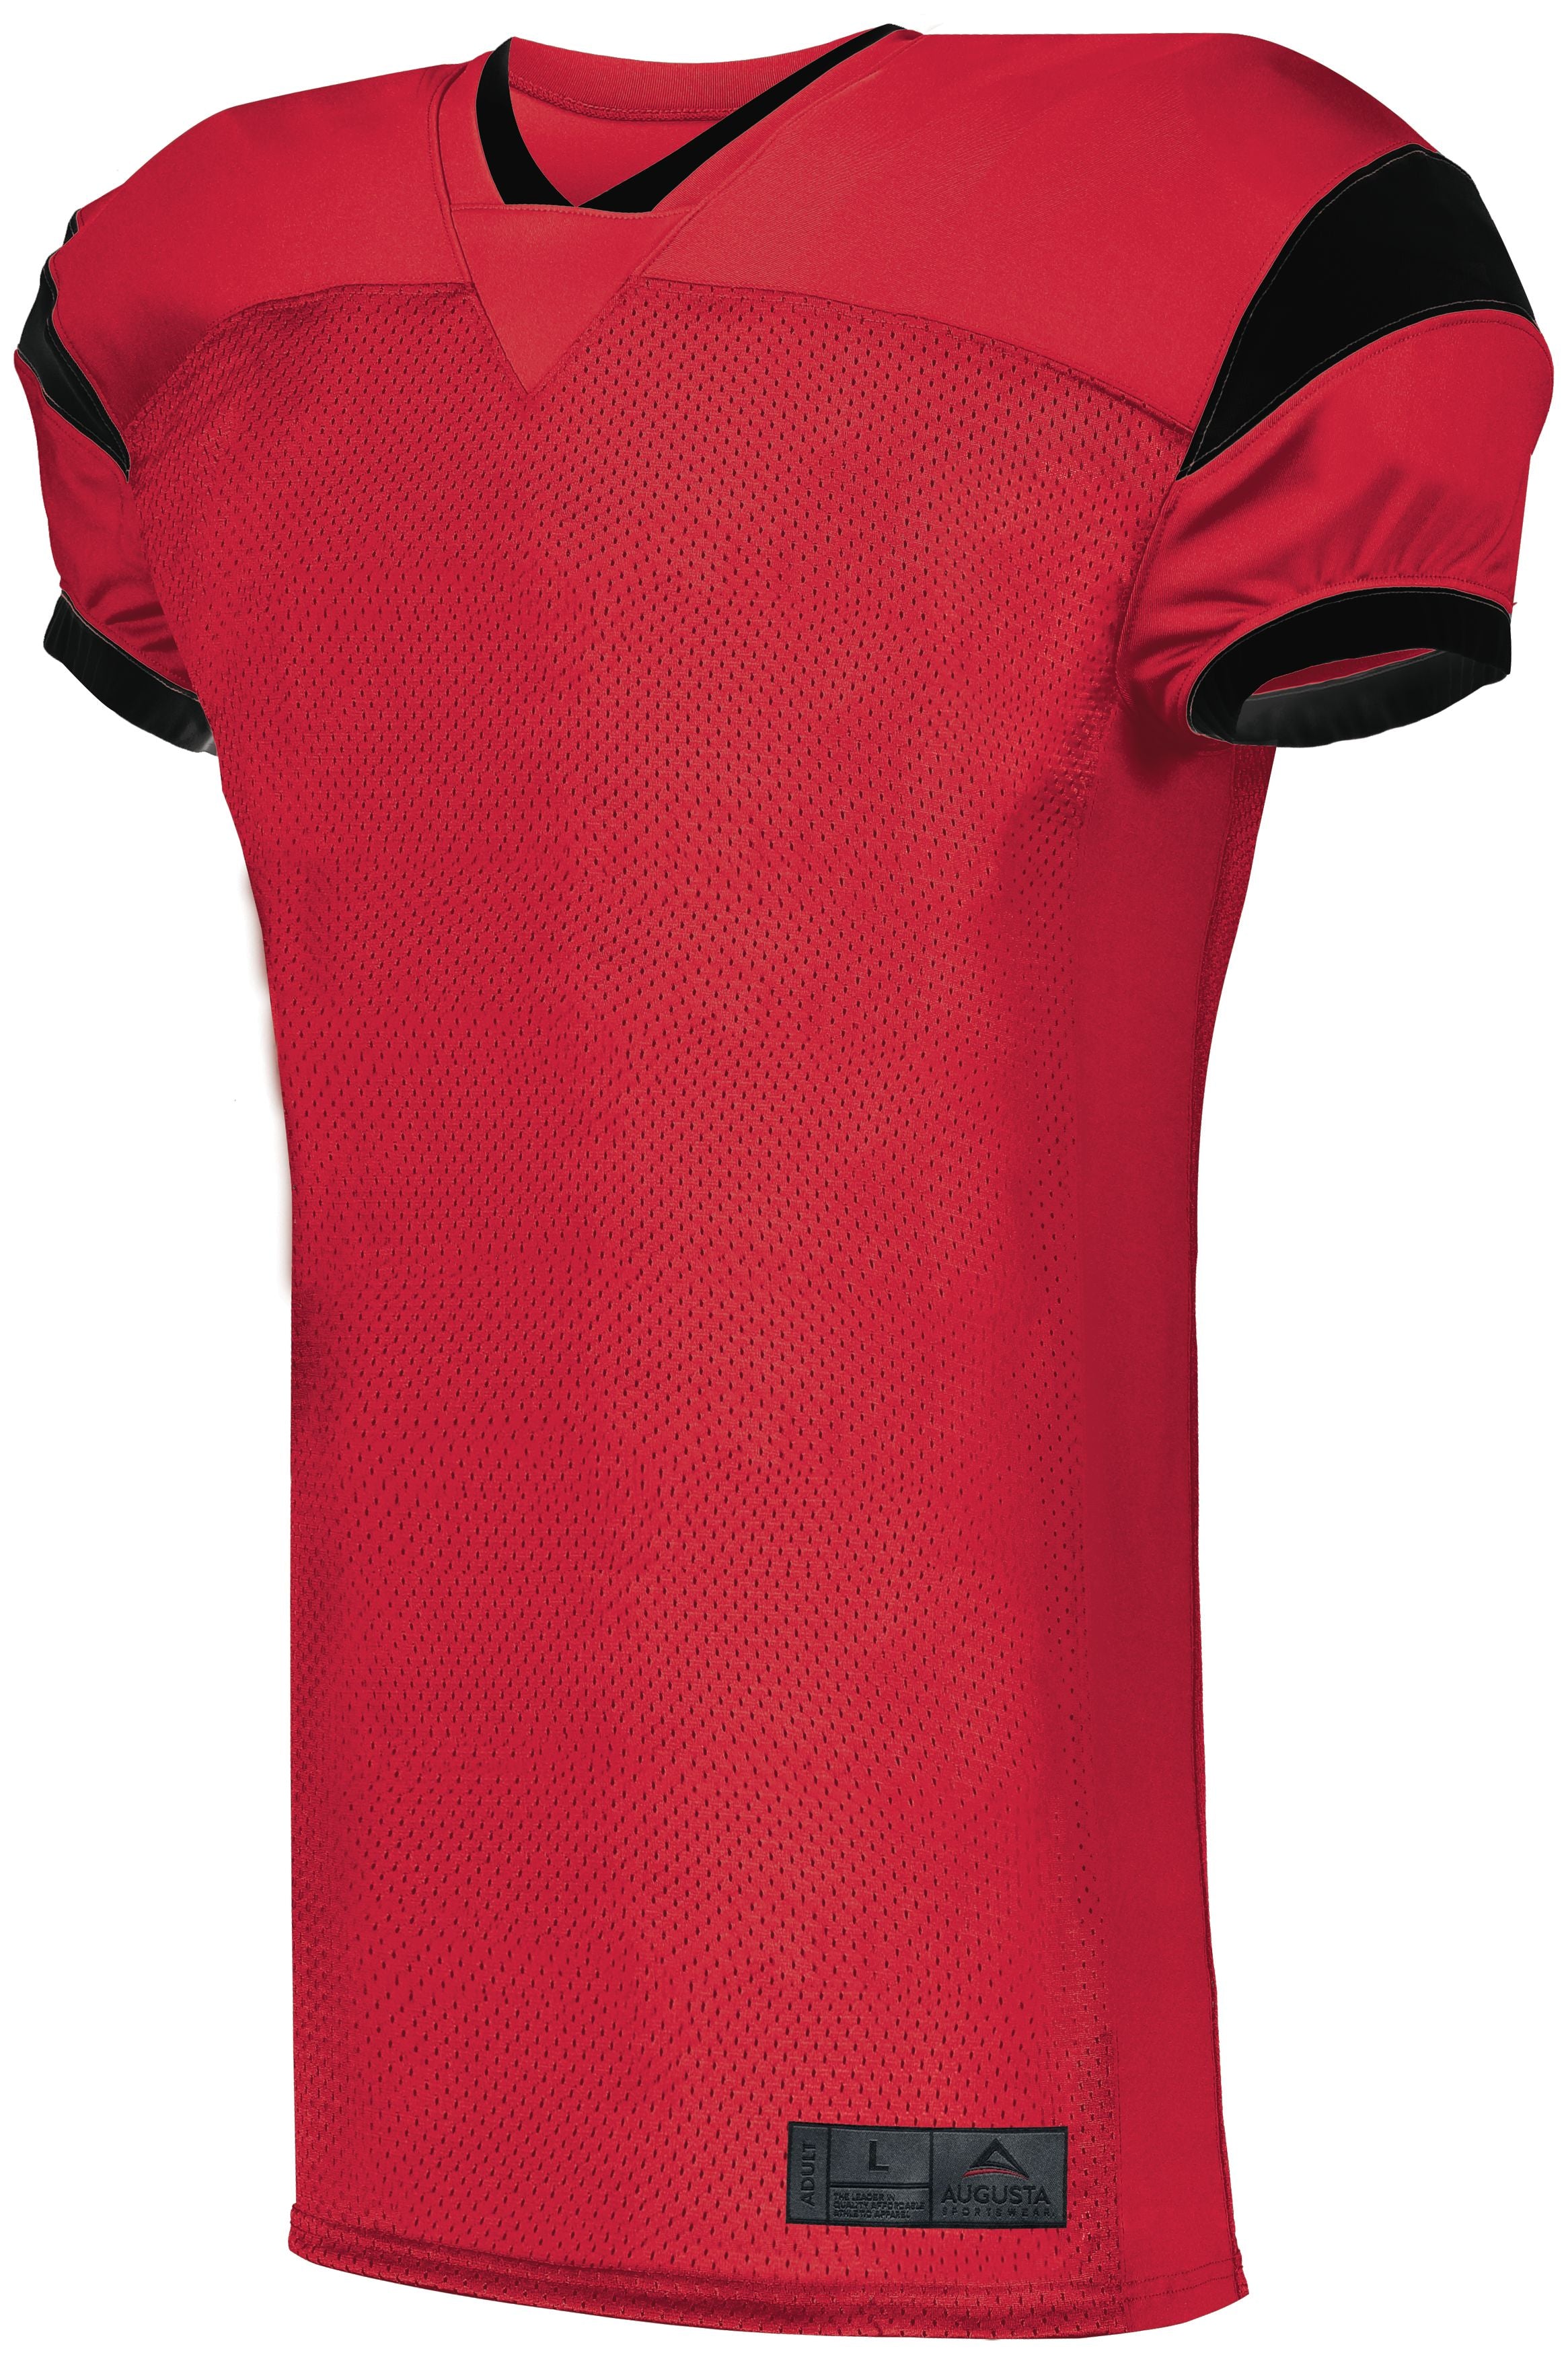 Augusta Sportswear Slant Football Jersey in Red/Black  -Part of the Adult, Adult-Jersey, Augusta-Products, Football, Shirts, All-Sports, All-Sports-1 product lines at KanaleyCreations.com